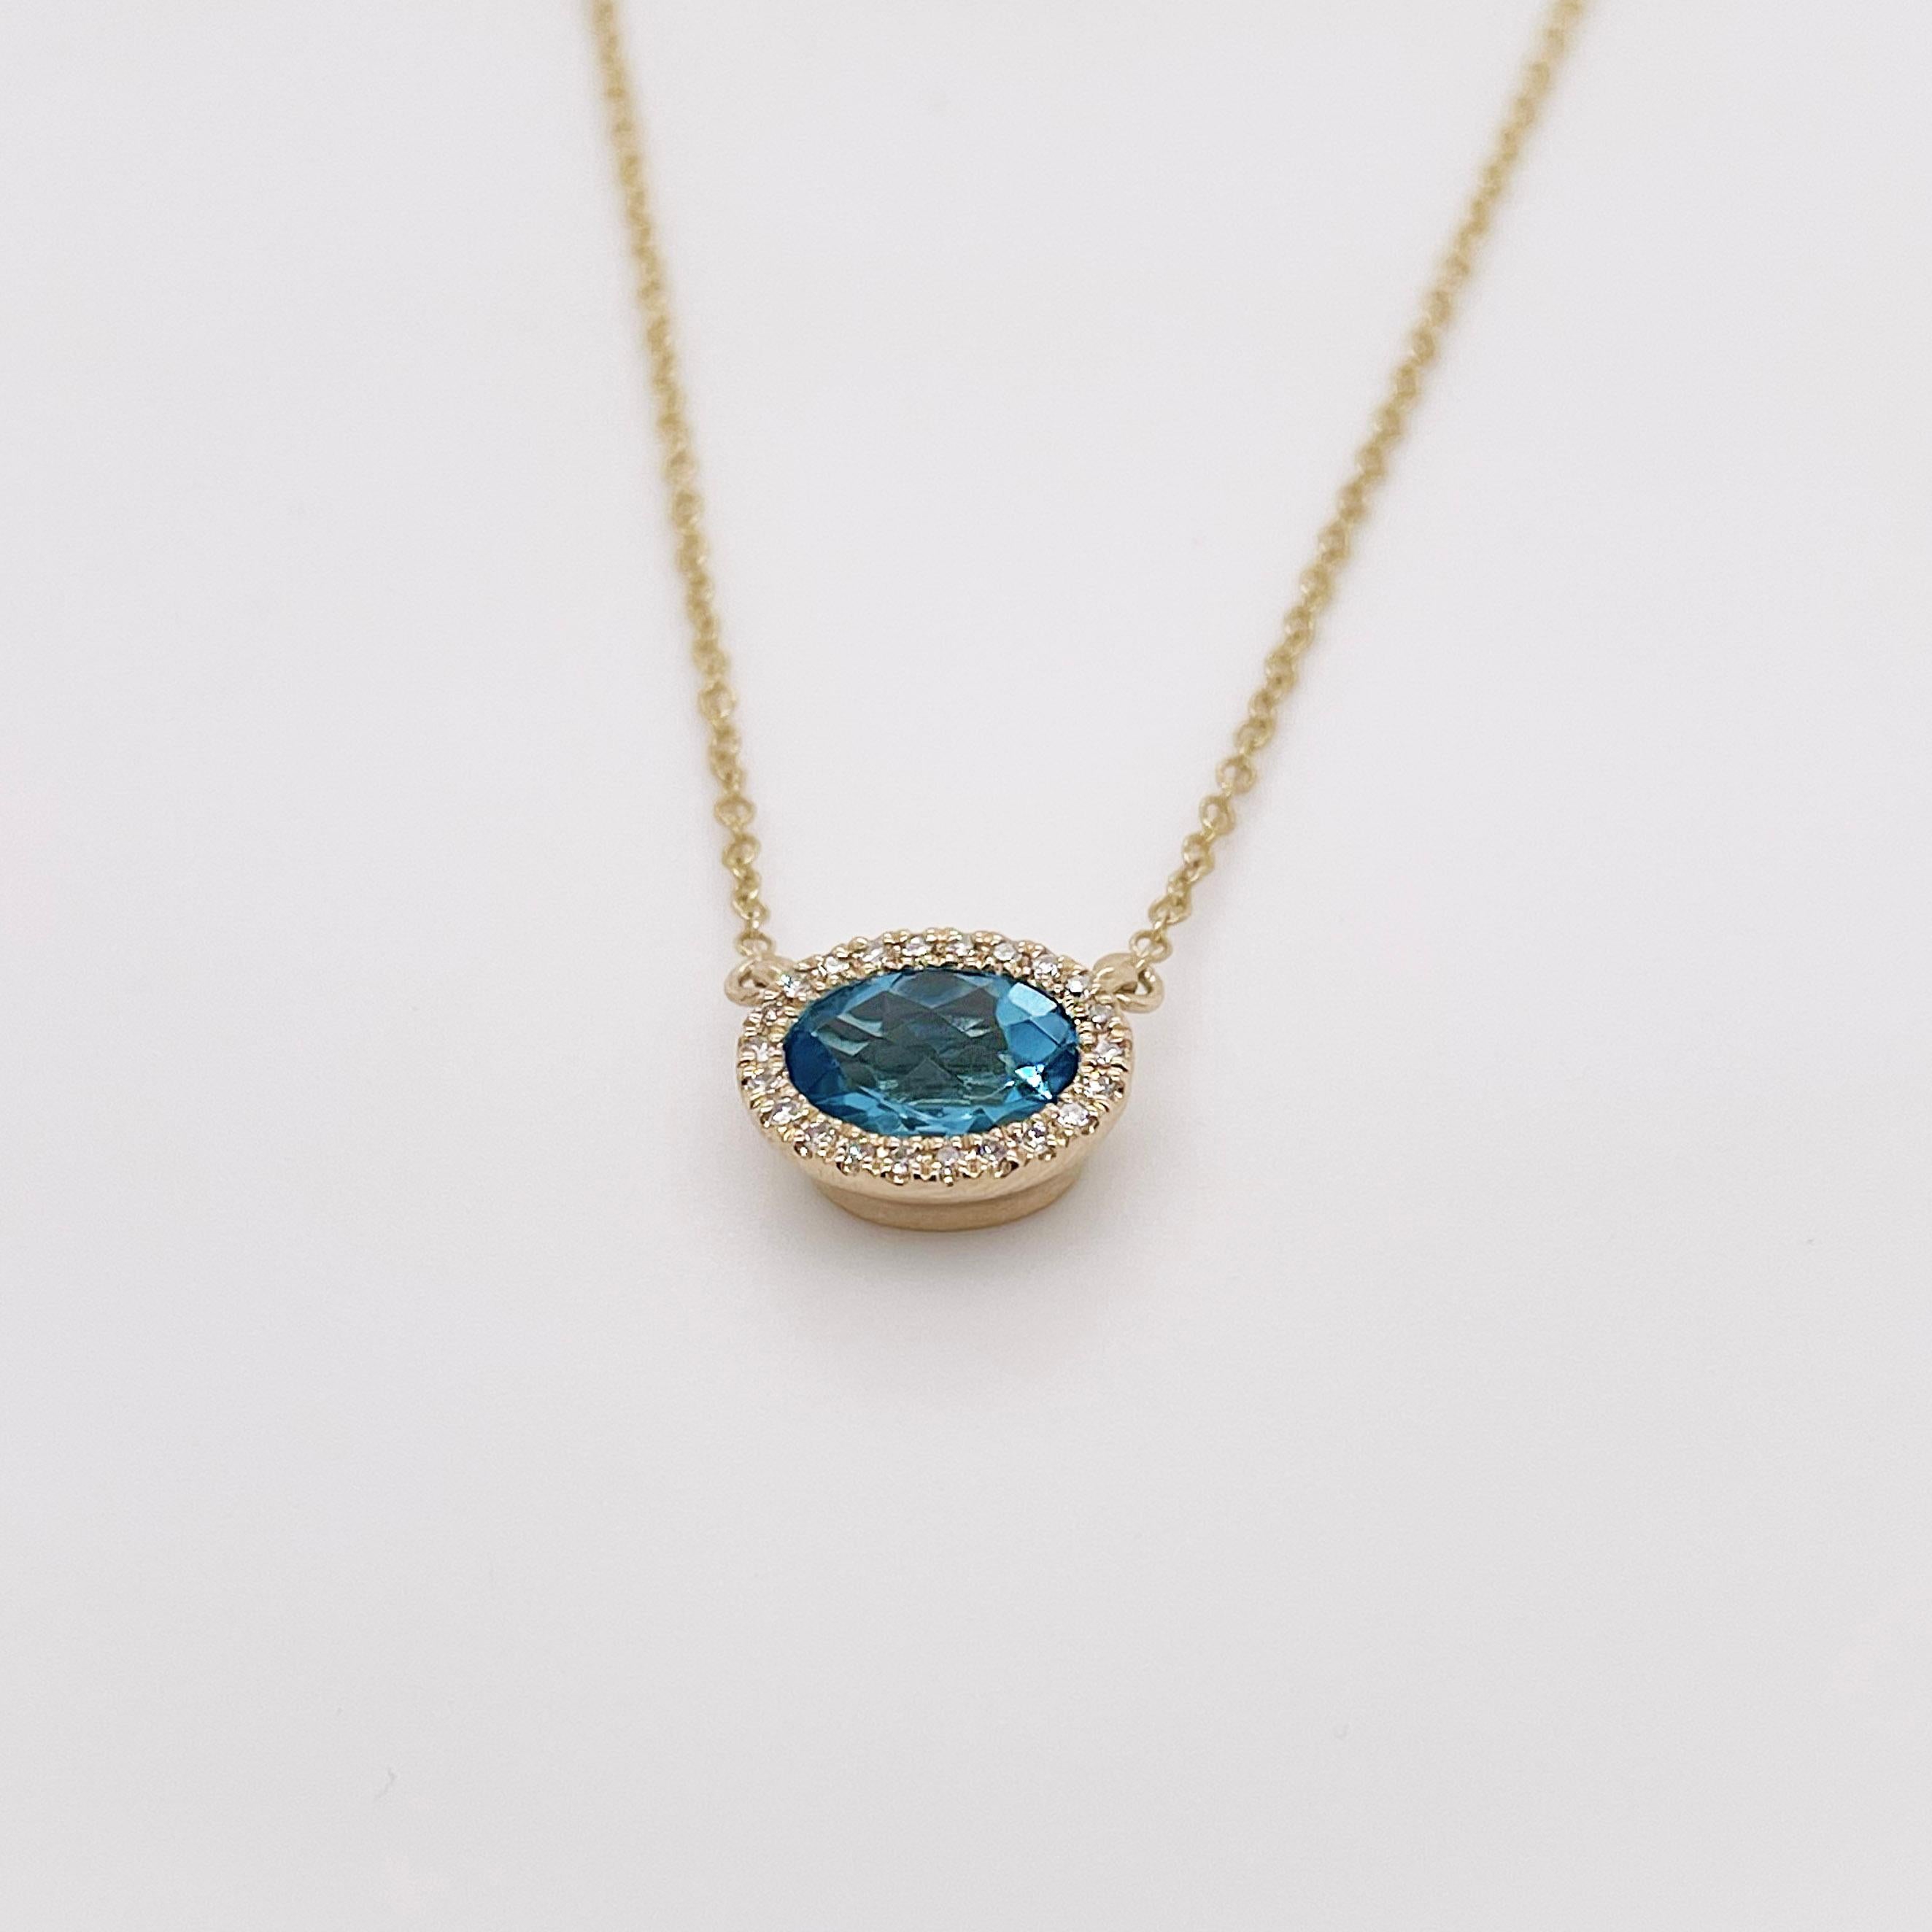 Blue topaz and diamond pendant, made in solid 14 karat yellow gold. This pendant is made with genuine, natural diamonds and a genuine blue topaz gemstone. The blue topaz gemstone is vivid and vibrant and pairs perfectly with other necklaces! 

The